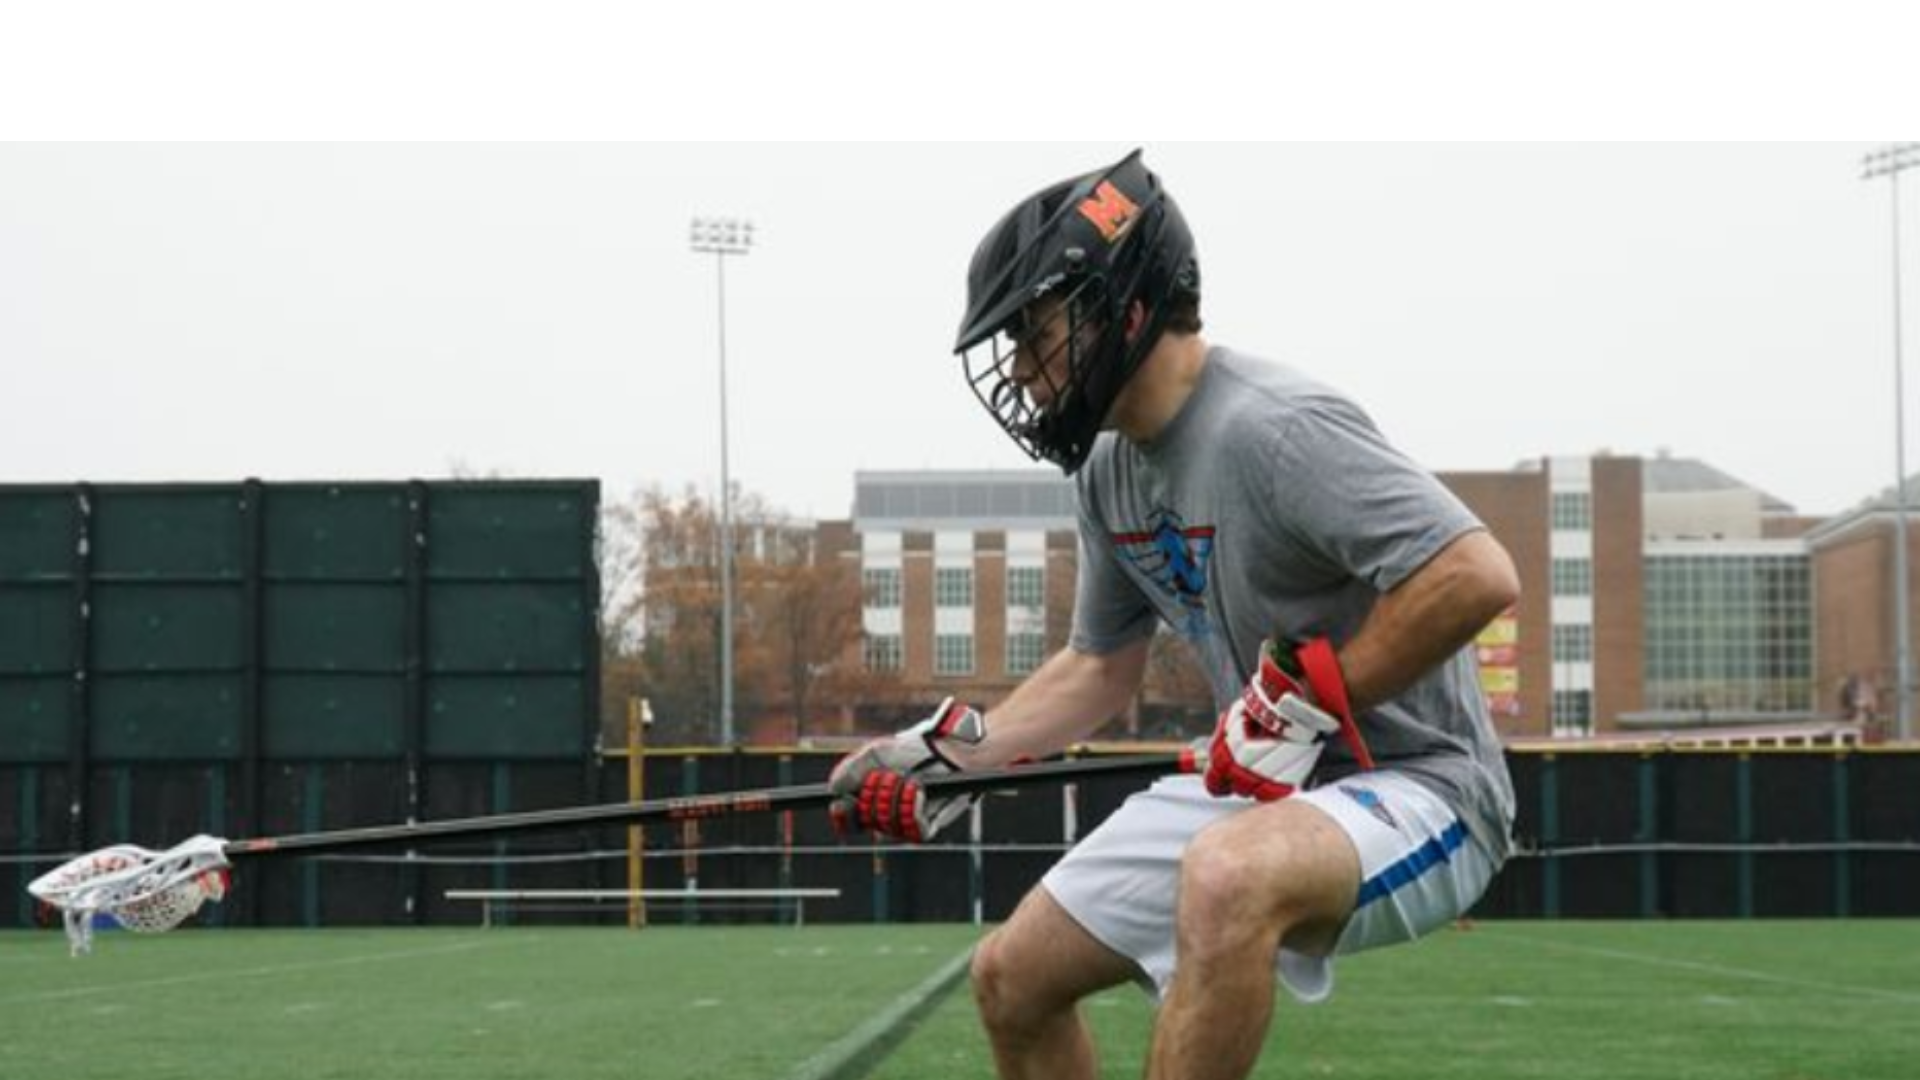 Positionless Defense: Building a defense in modern lacrosse